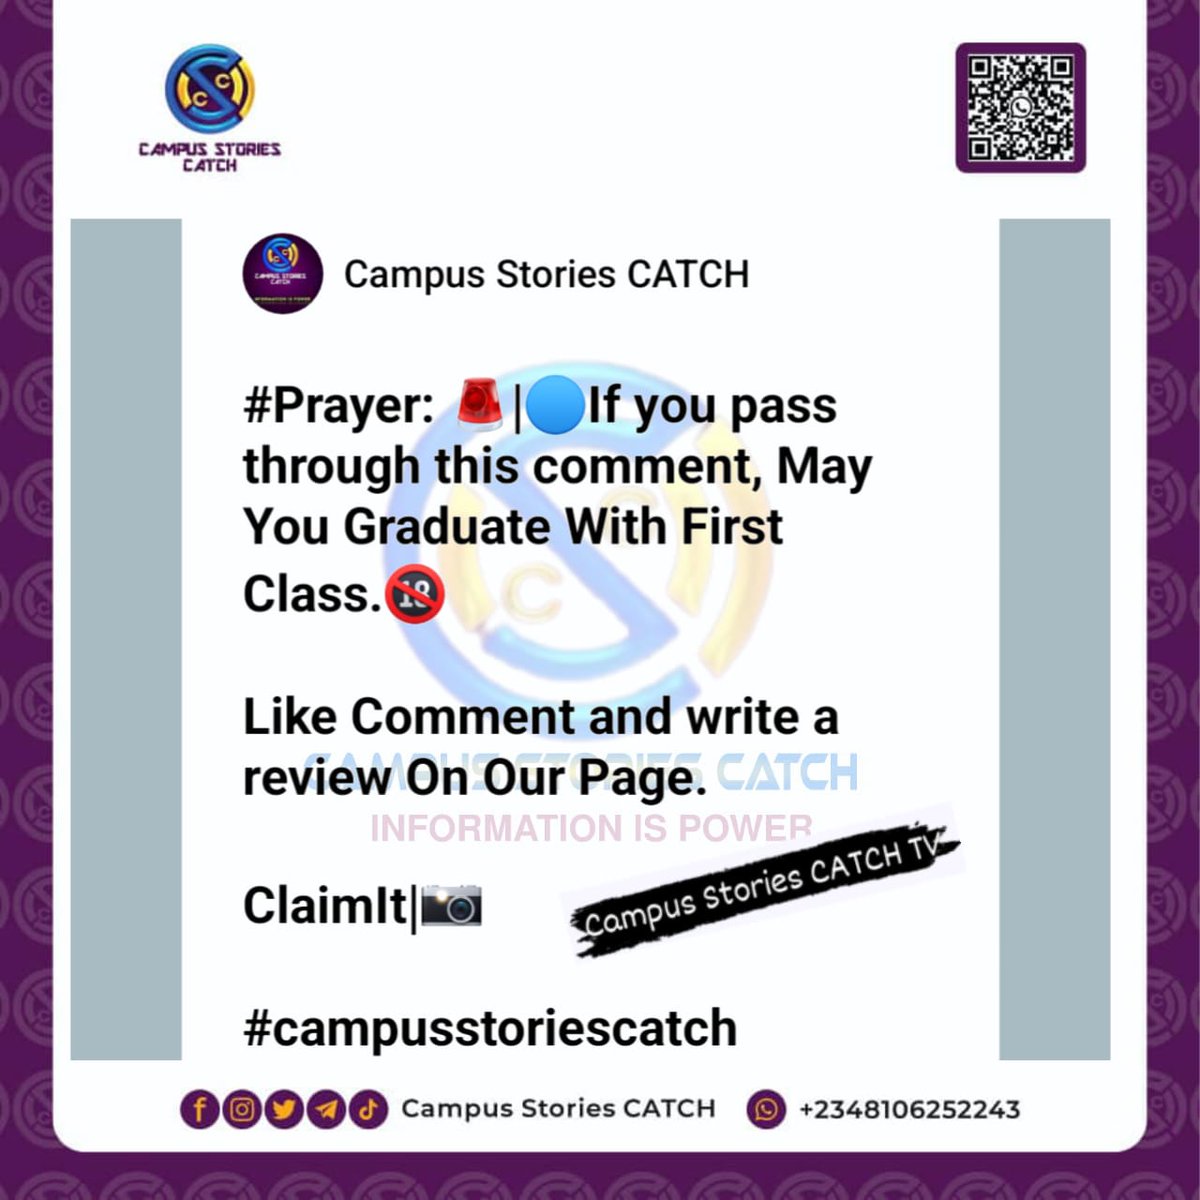 #Prayer: 🚨|🔵If you pass through this comment, May You Graduate With First Class.🔞

Like Comment and write a review On Our Page.

ClaimIt|📸

#campusstoriescatch